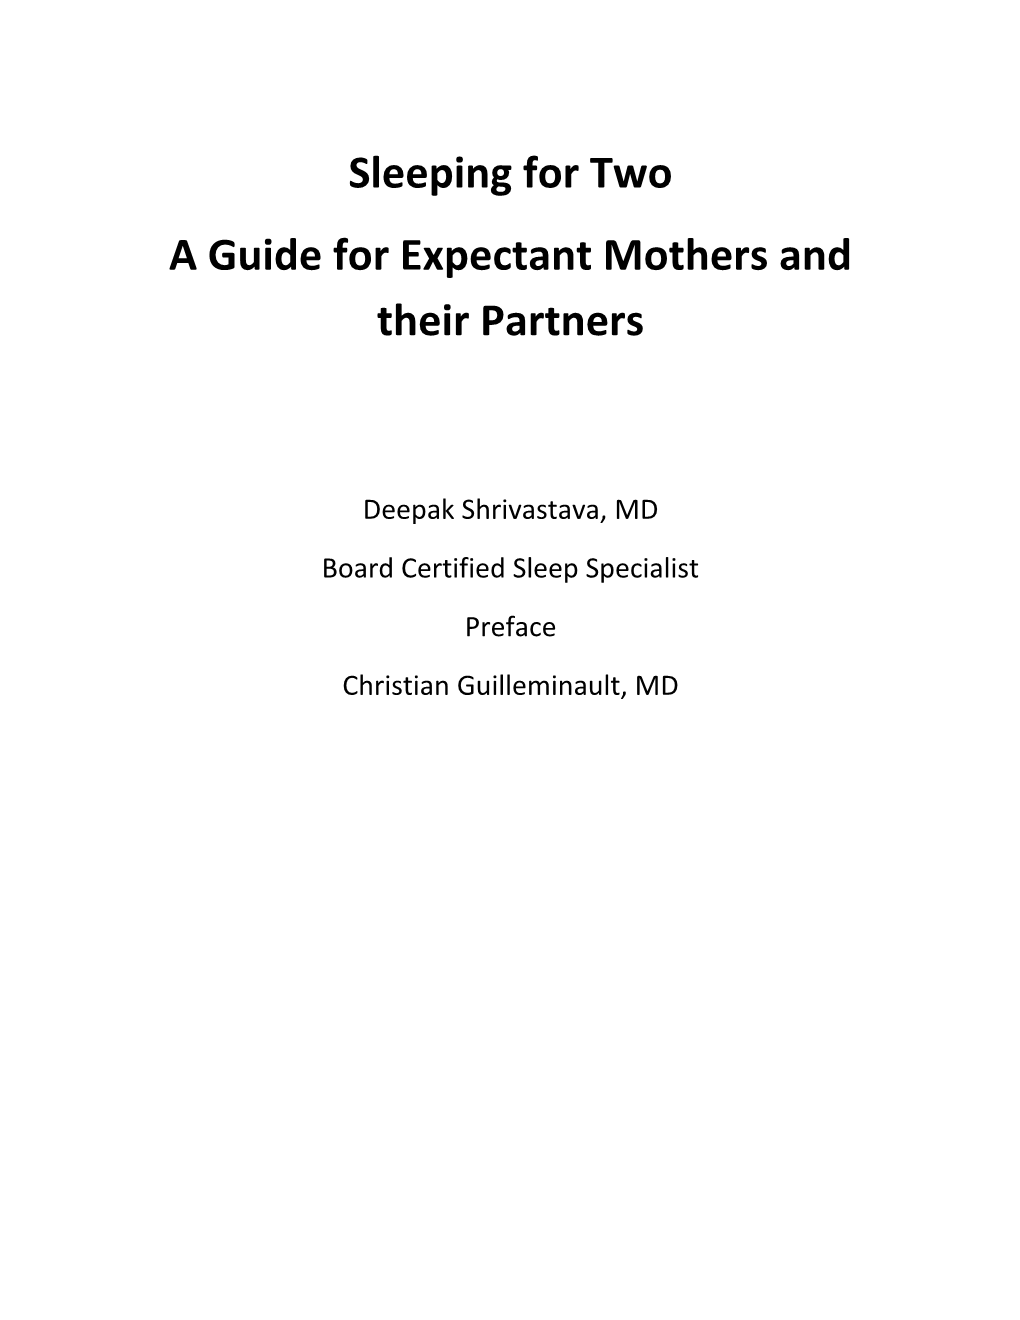 A Guide for Expectant Mothers and Their Partners